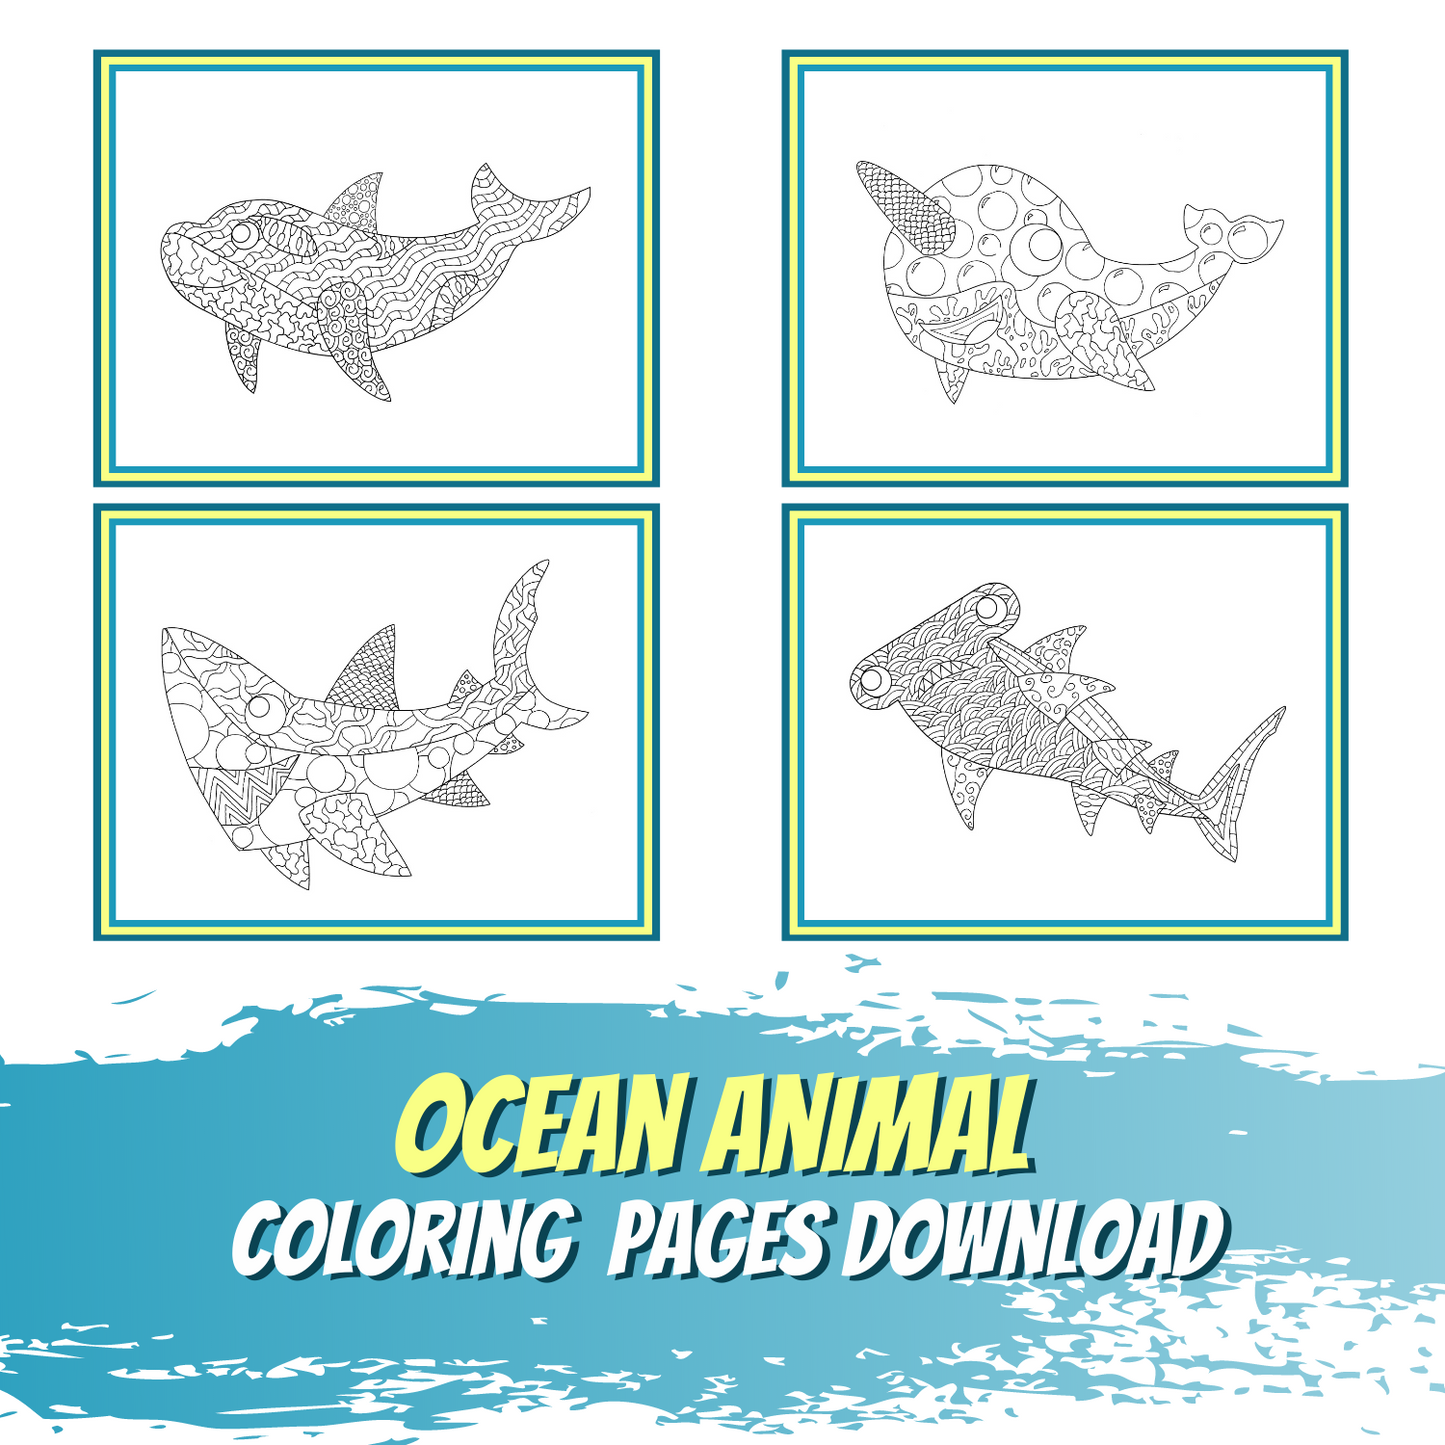 Little World of Beasts - Ocean Animal Coloring Pages - Patterns